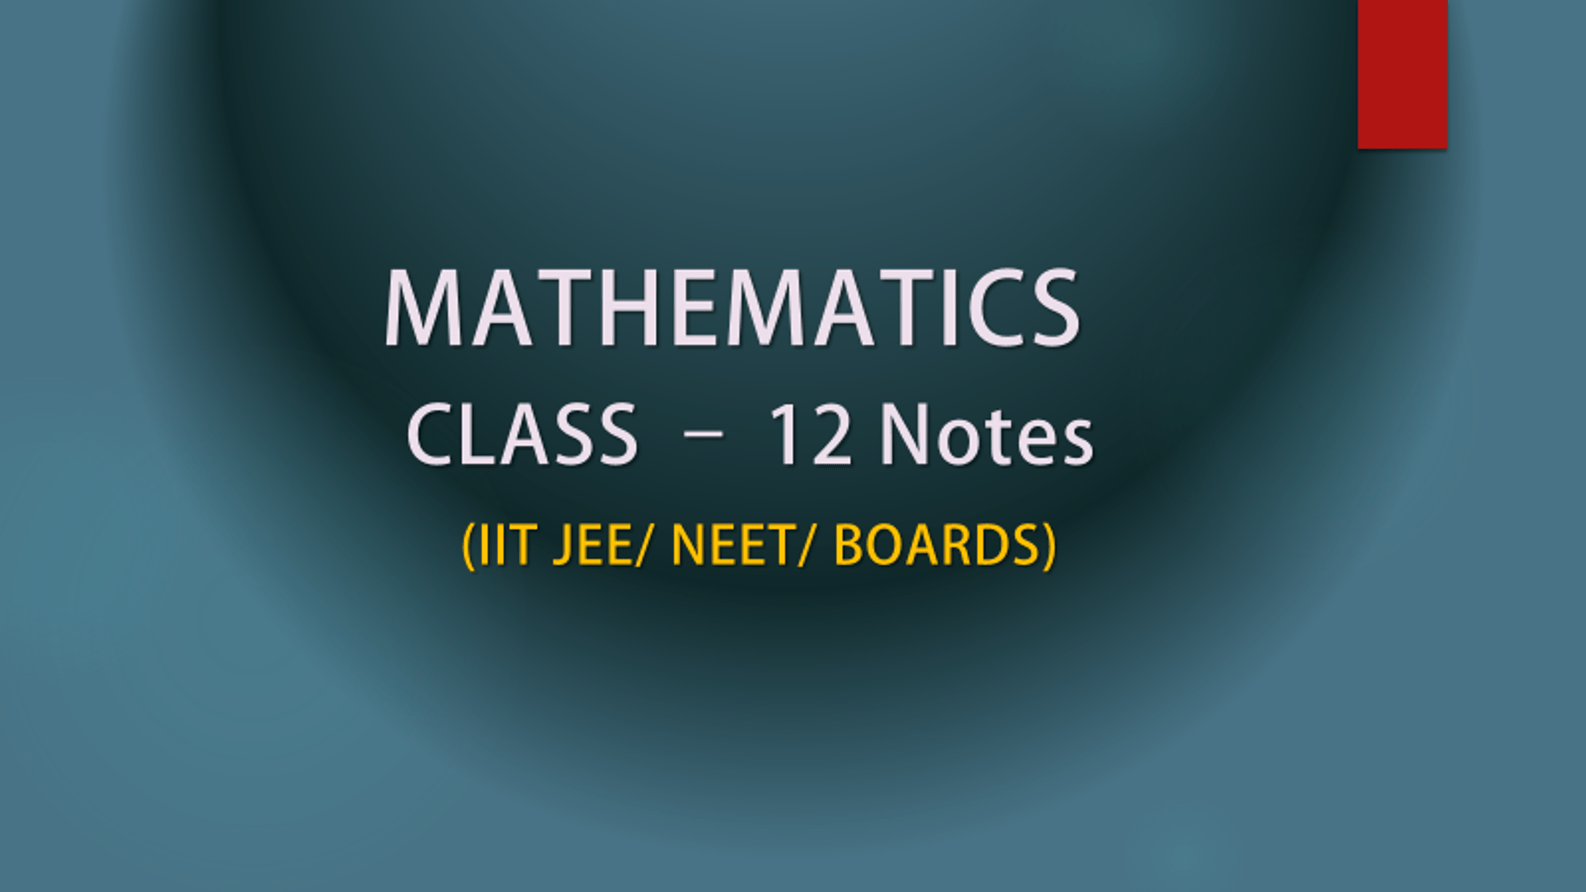 Chapter 1- 13 Mathematics Notes for Class 12 and IIT JEE